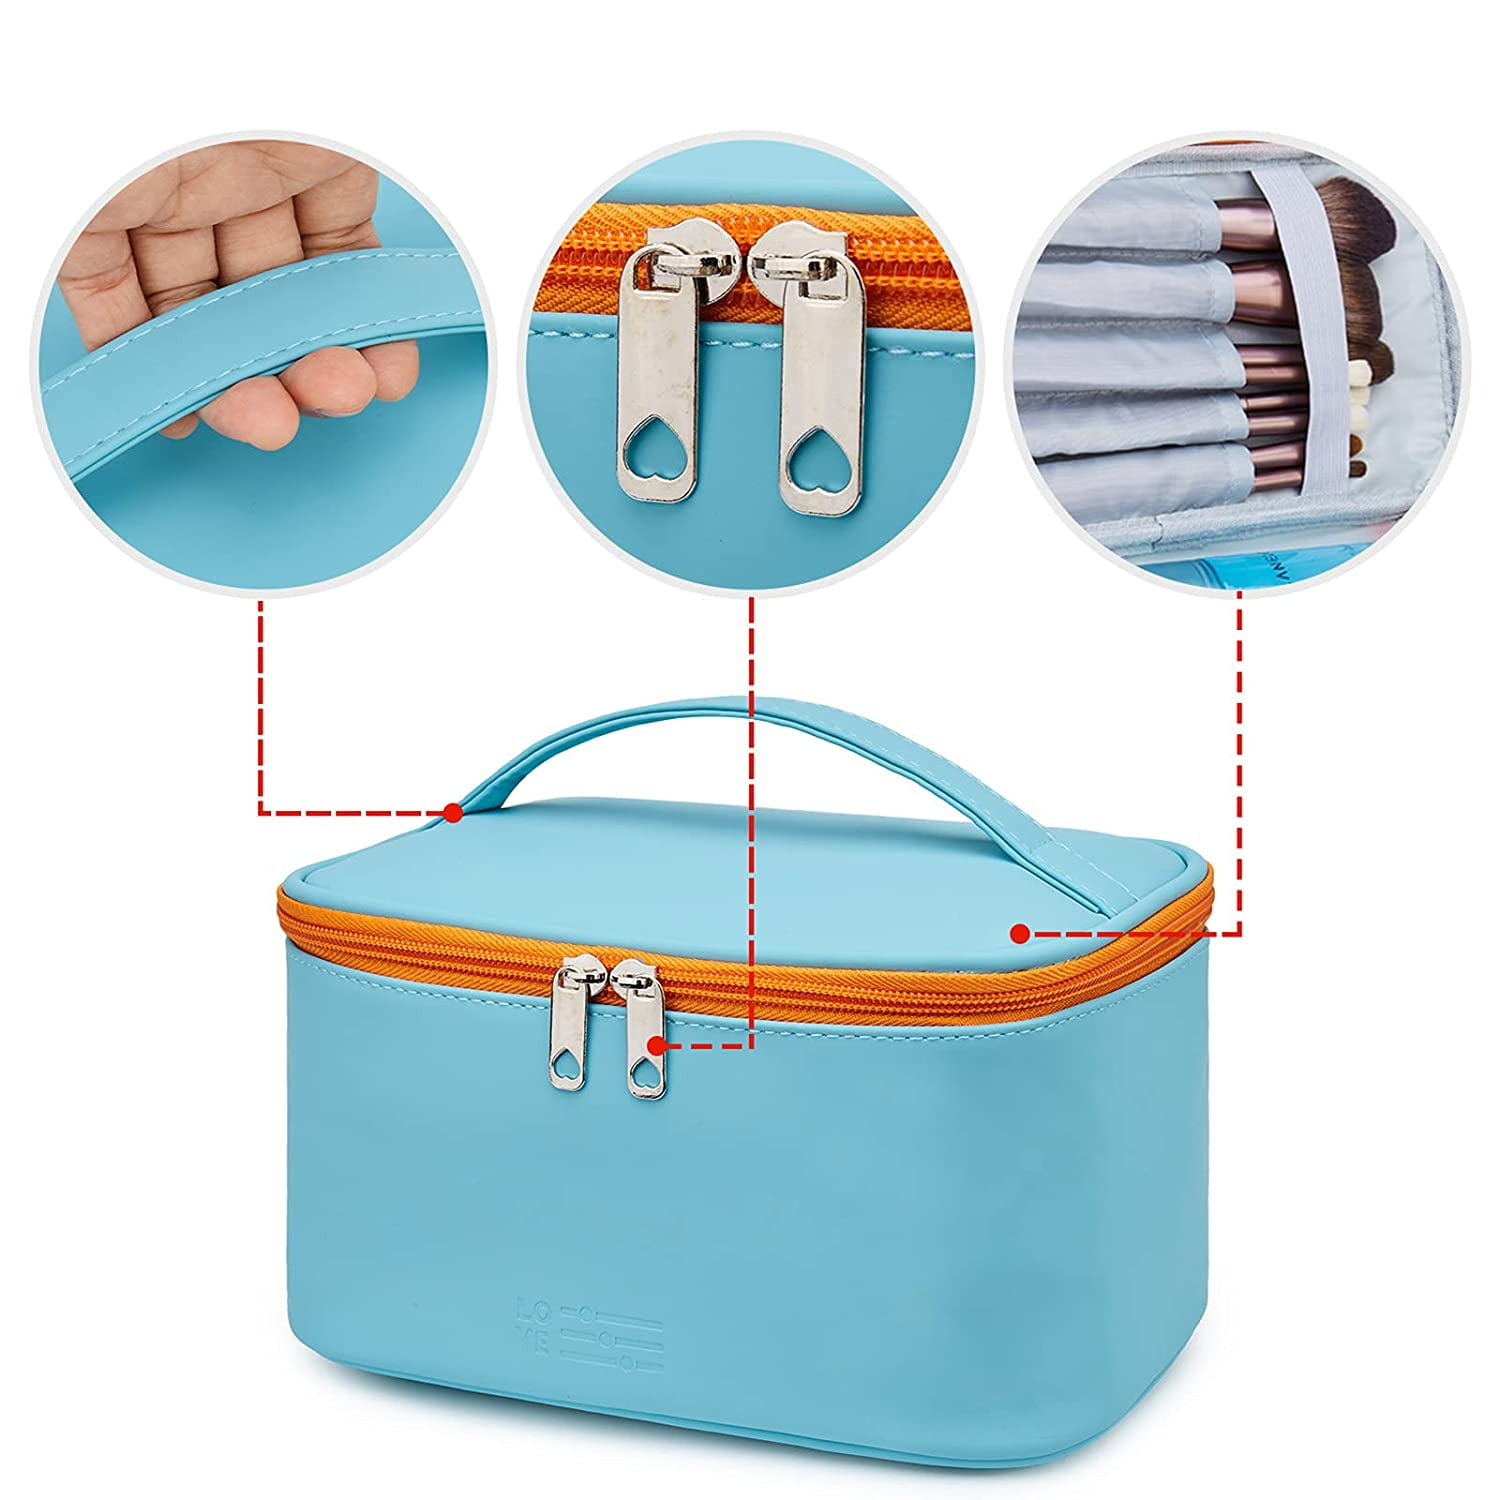 CUBETASTIC Travel Toiletry Bag, Portable Makeup Bag with Hanging Hook  Waterproof Cosmetic Organizer Case 3 Compartment Leather Pouch for  Toiletries